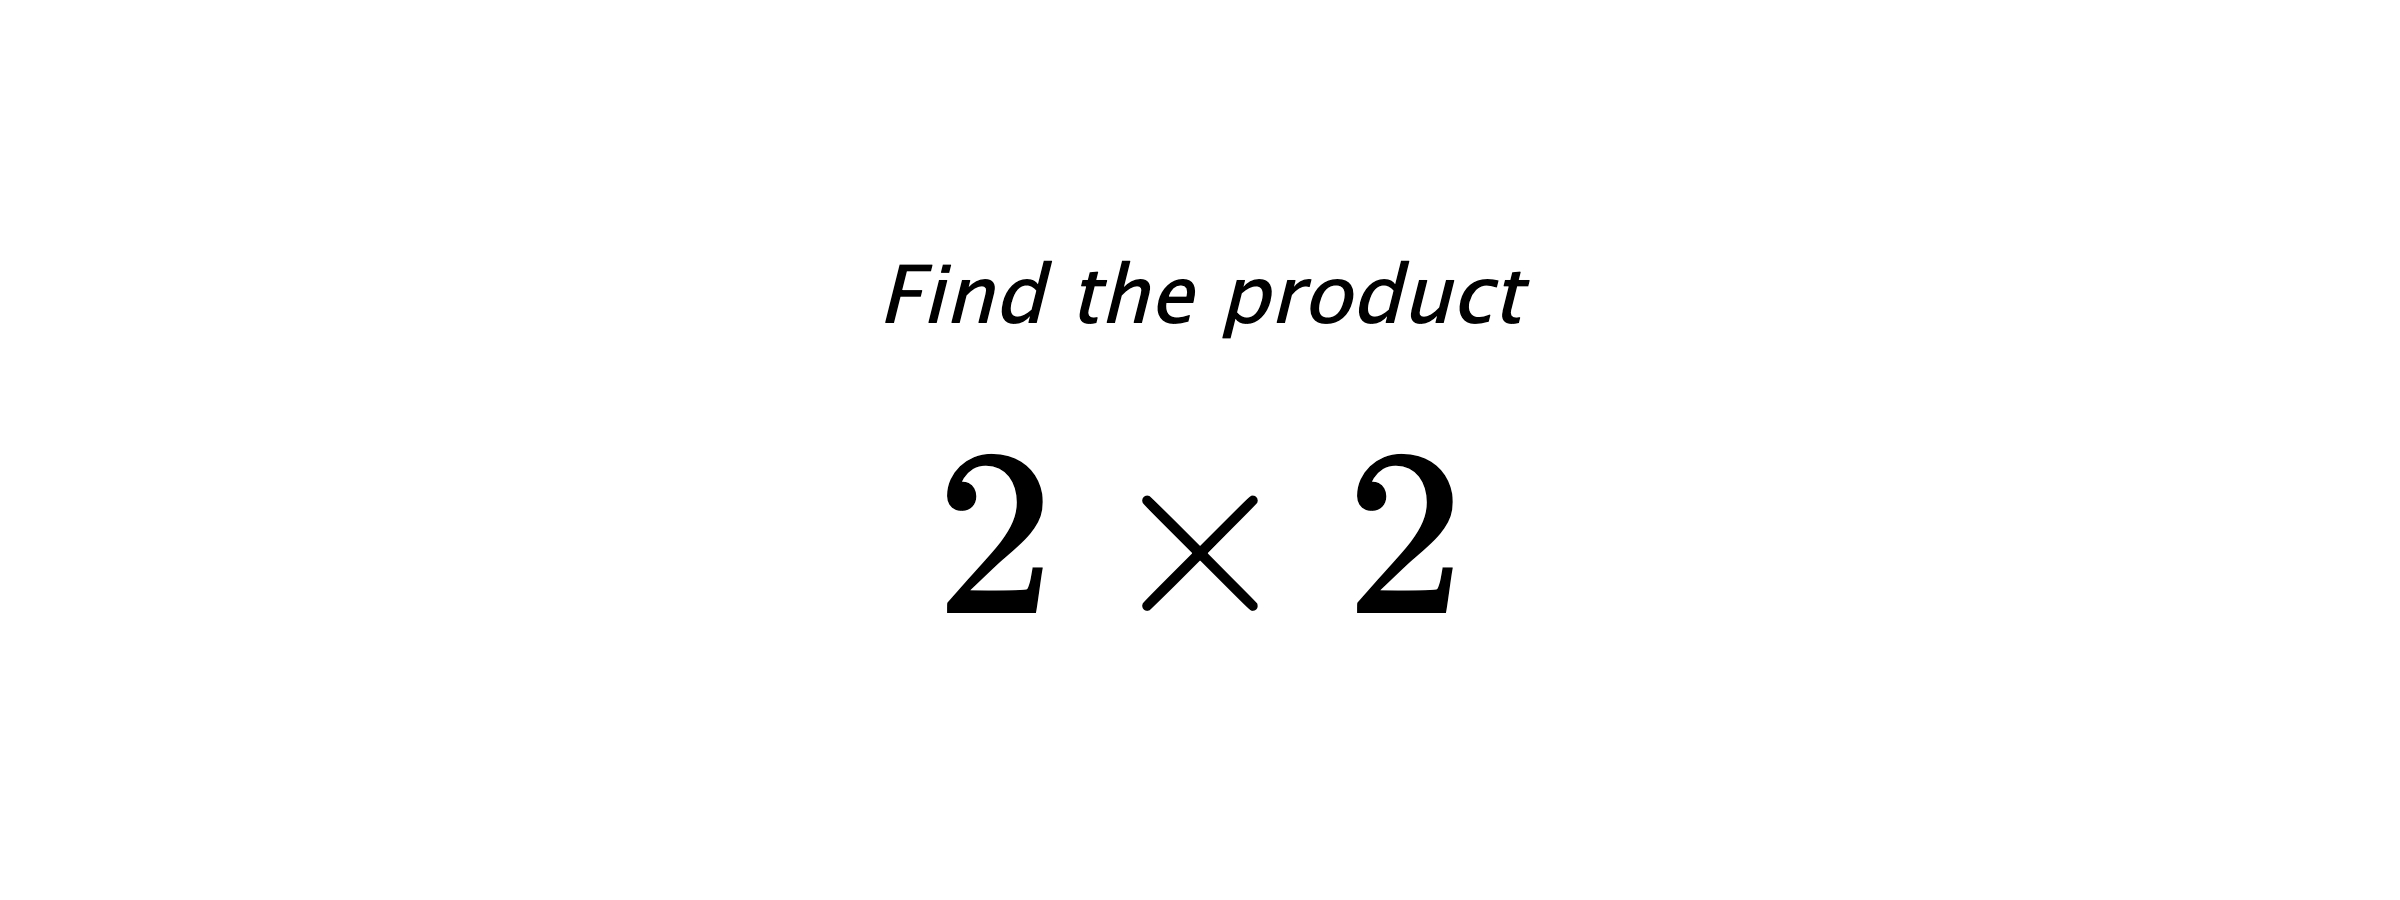 Find the product $ 2 \times 2 $